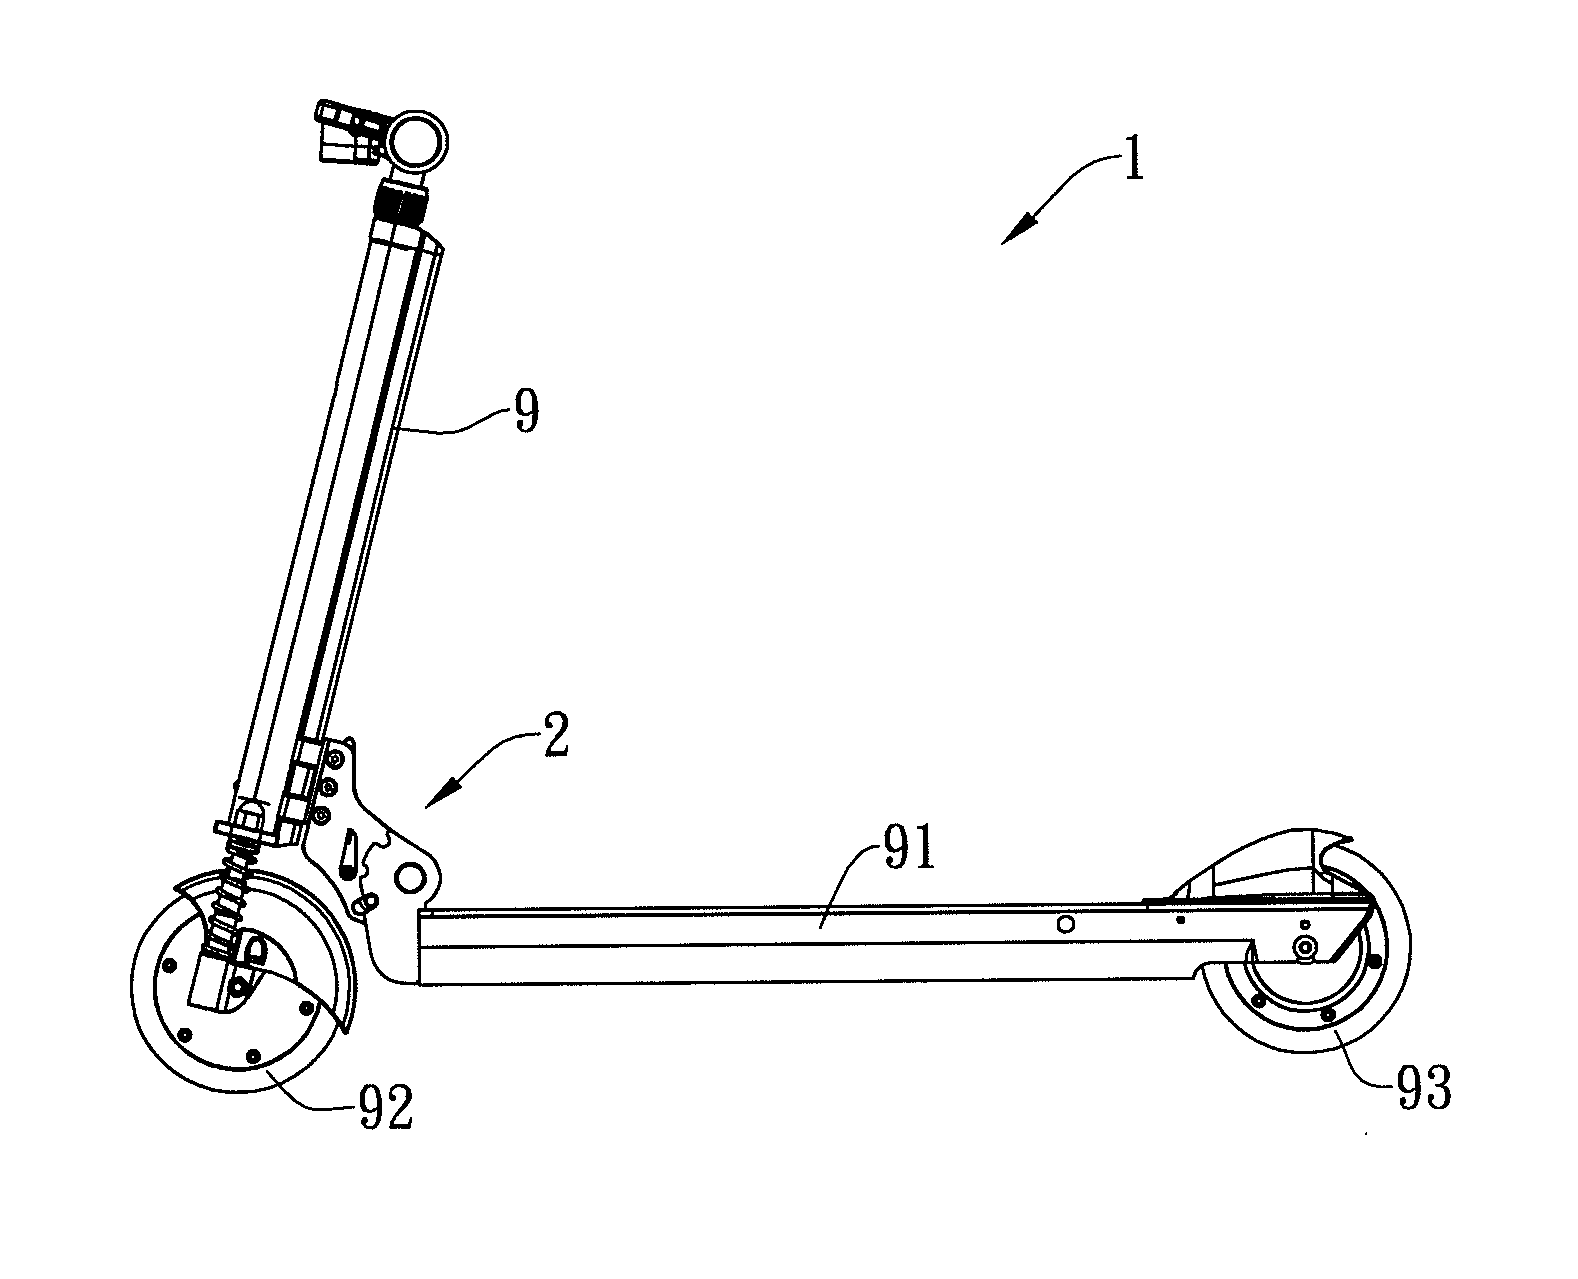 Integrated wheel and electric scooter using the wheel